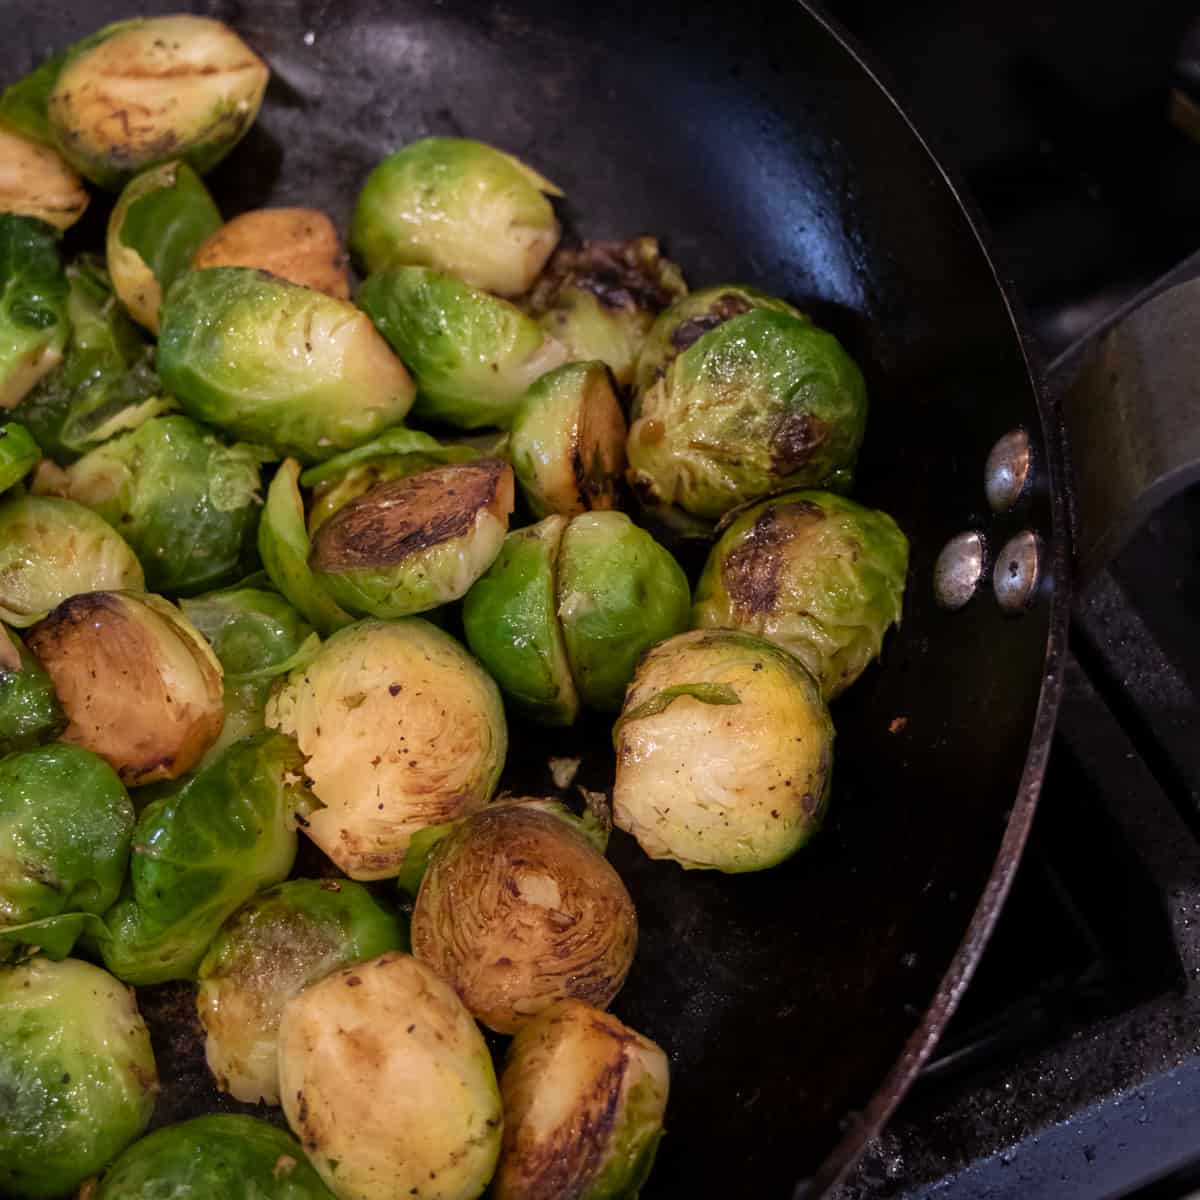 Sautéed Brussel's sprouts in a frying pan.